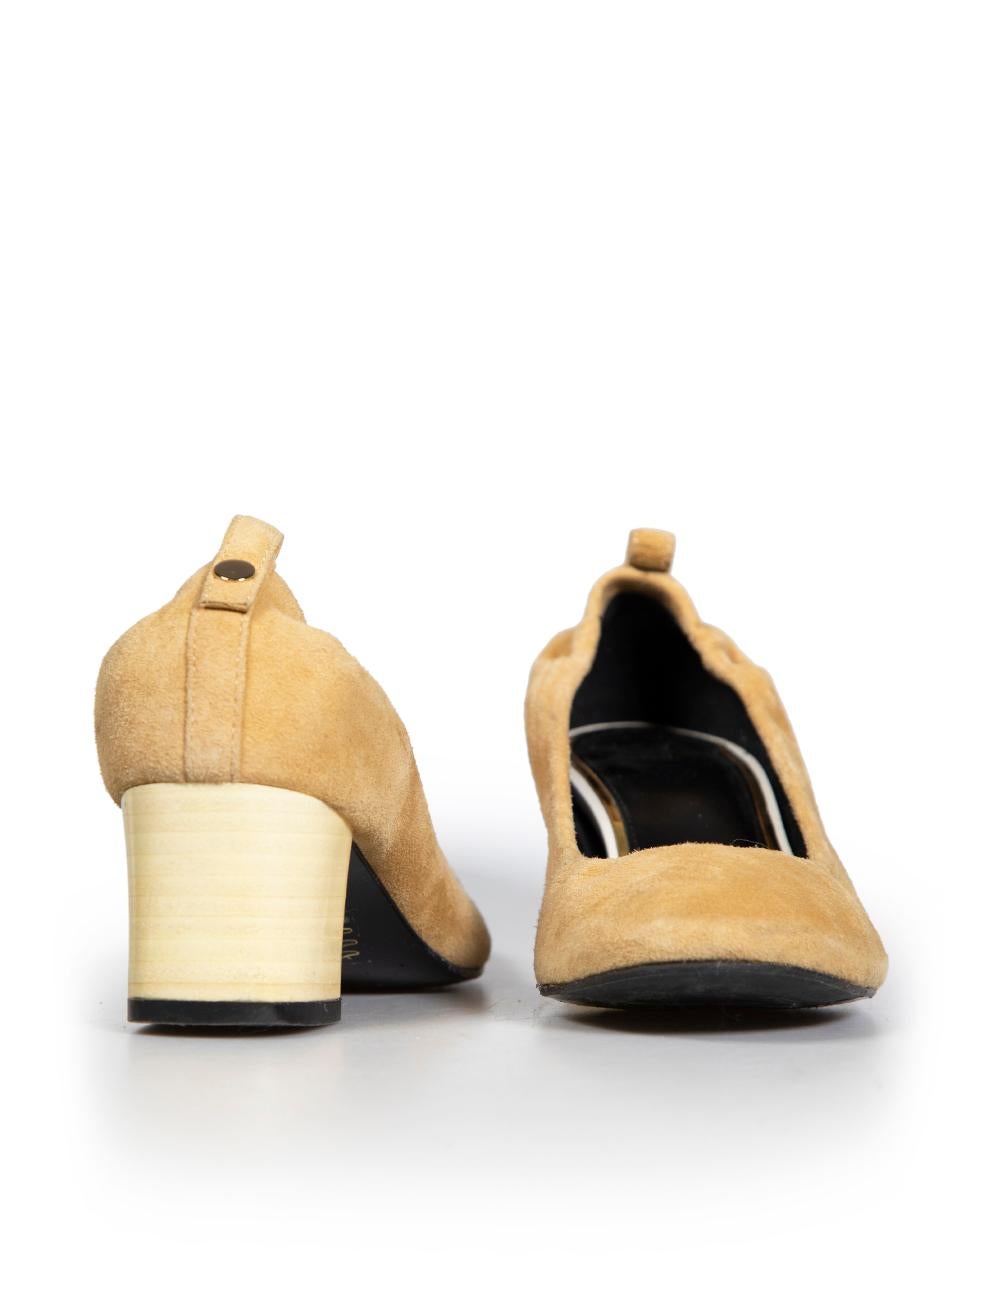 Lanvin Camel Suede Wooden Heel Pumps Size IT 35.5 In Good Condition For Sale In London, GB